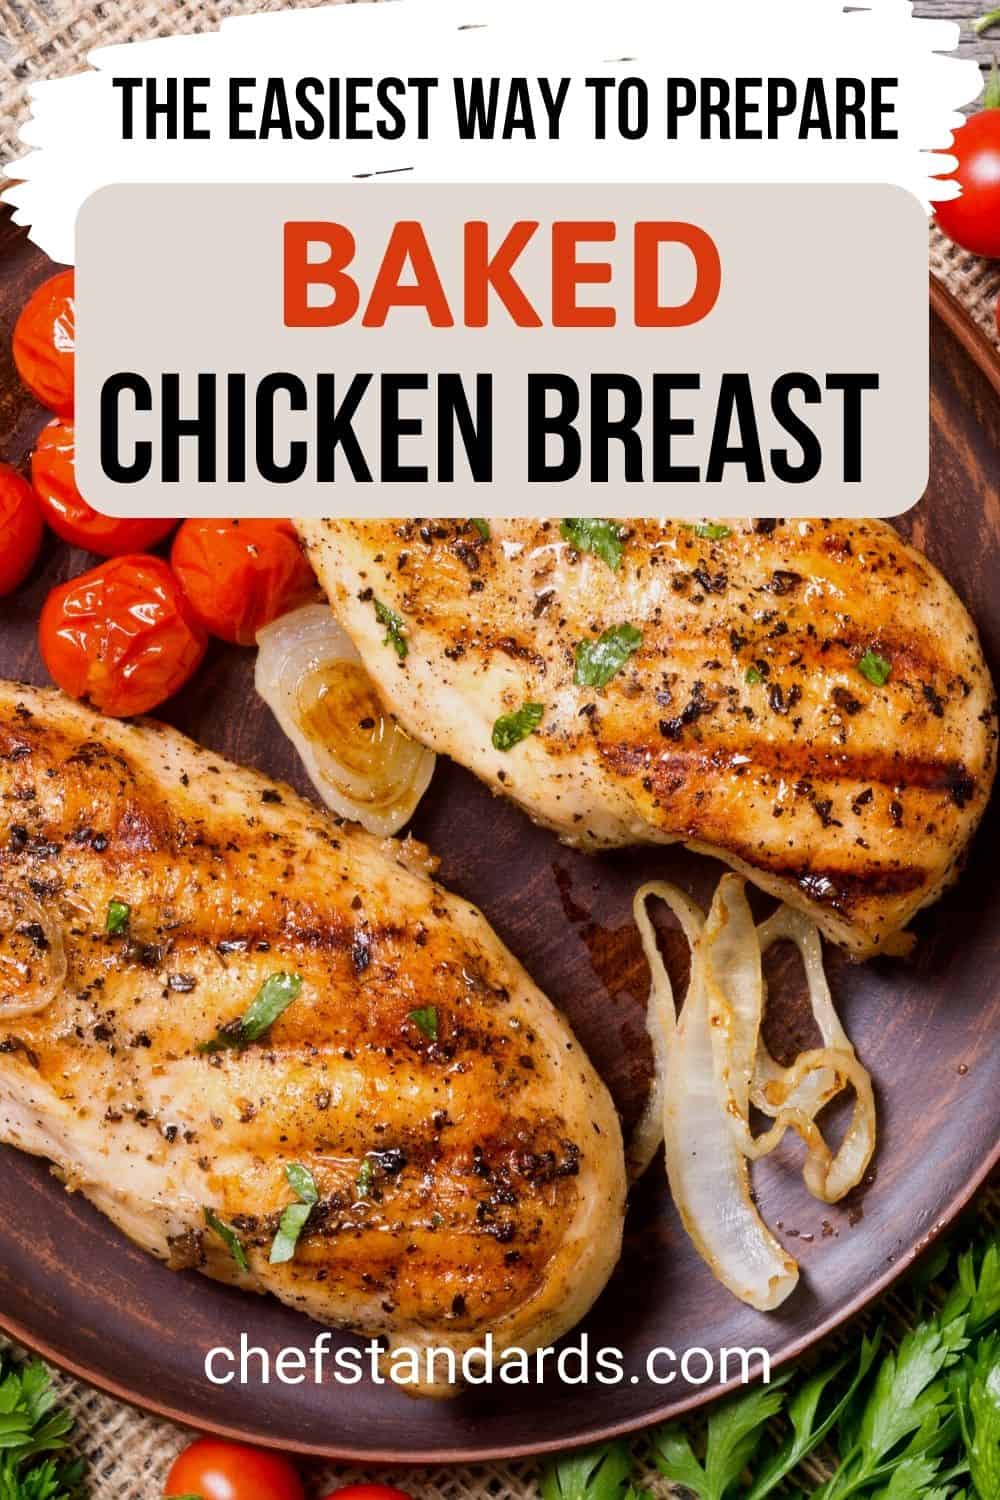 How Long To Bake Thin Chicken Breast + Baking Recipe
